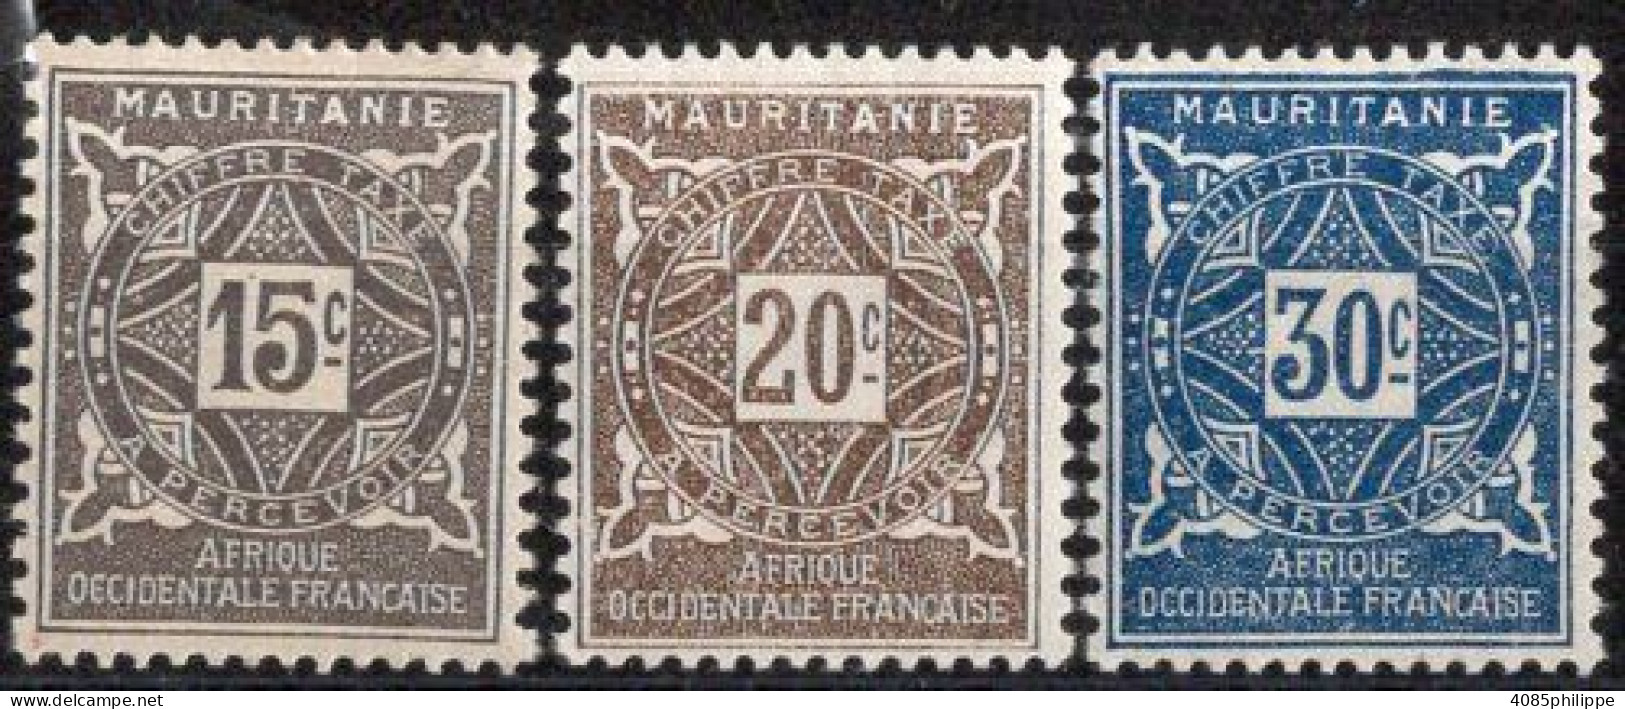 Mauritanie Timbres-Taxe N°19* à 21* Neufs Charnières TB Cote : 2€75 - Unused Stamps